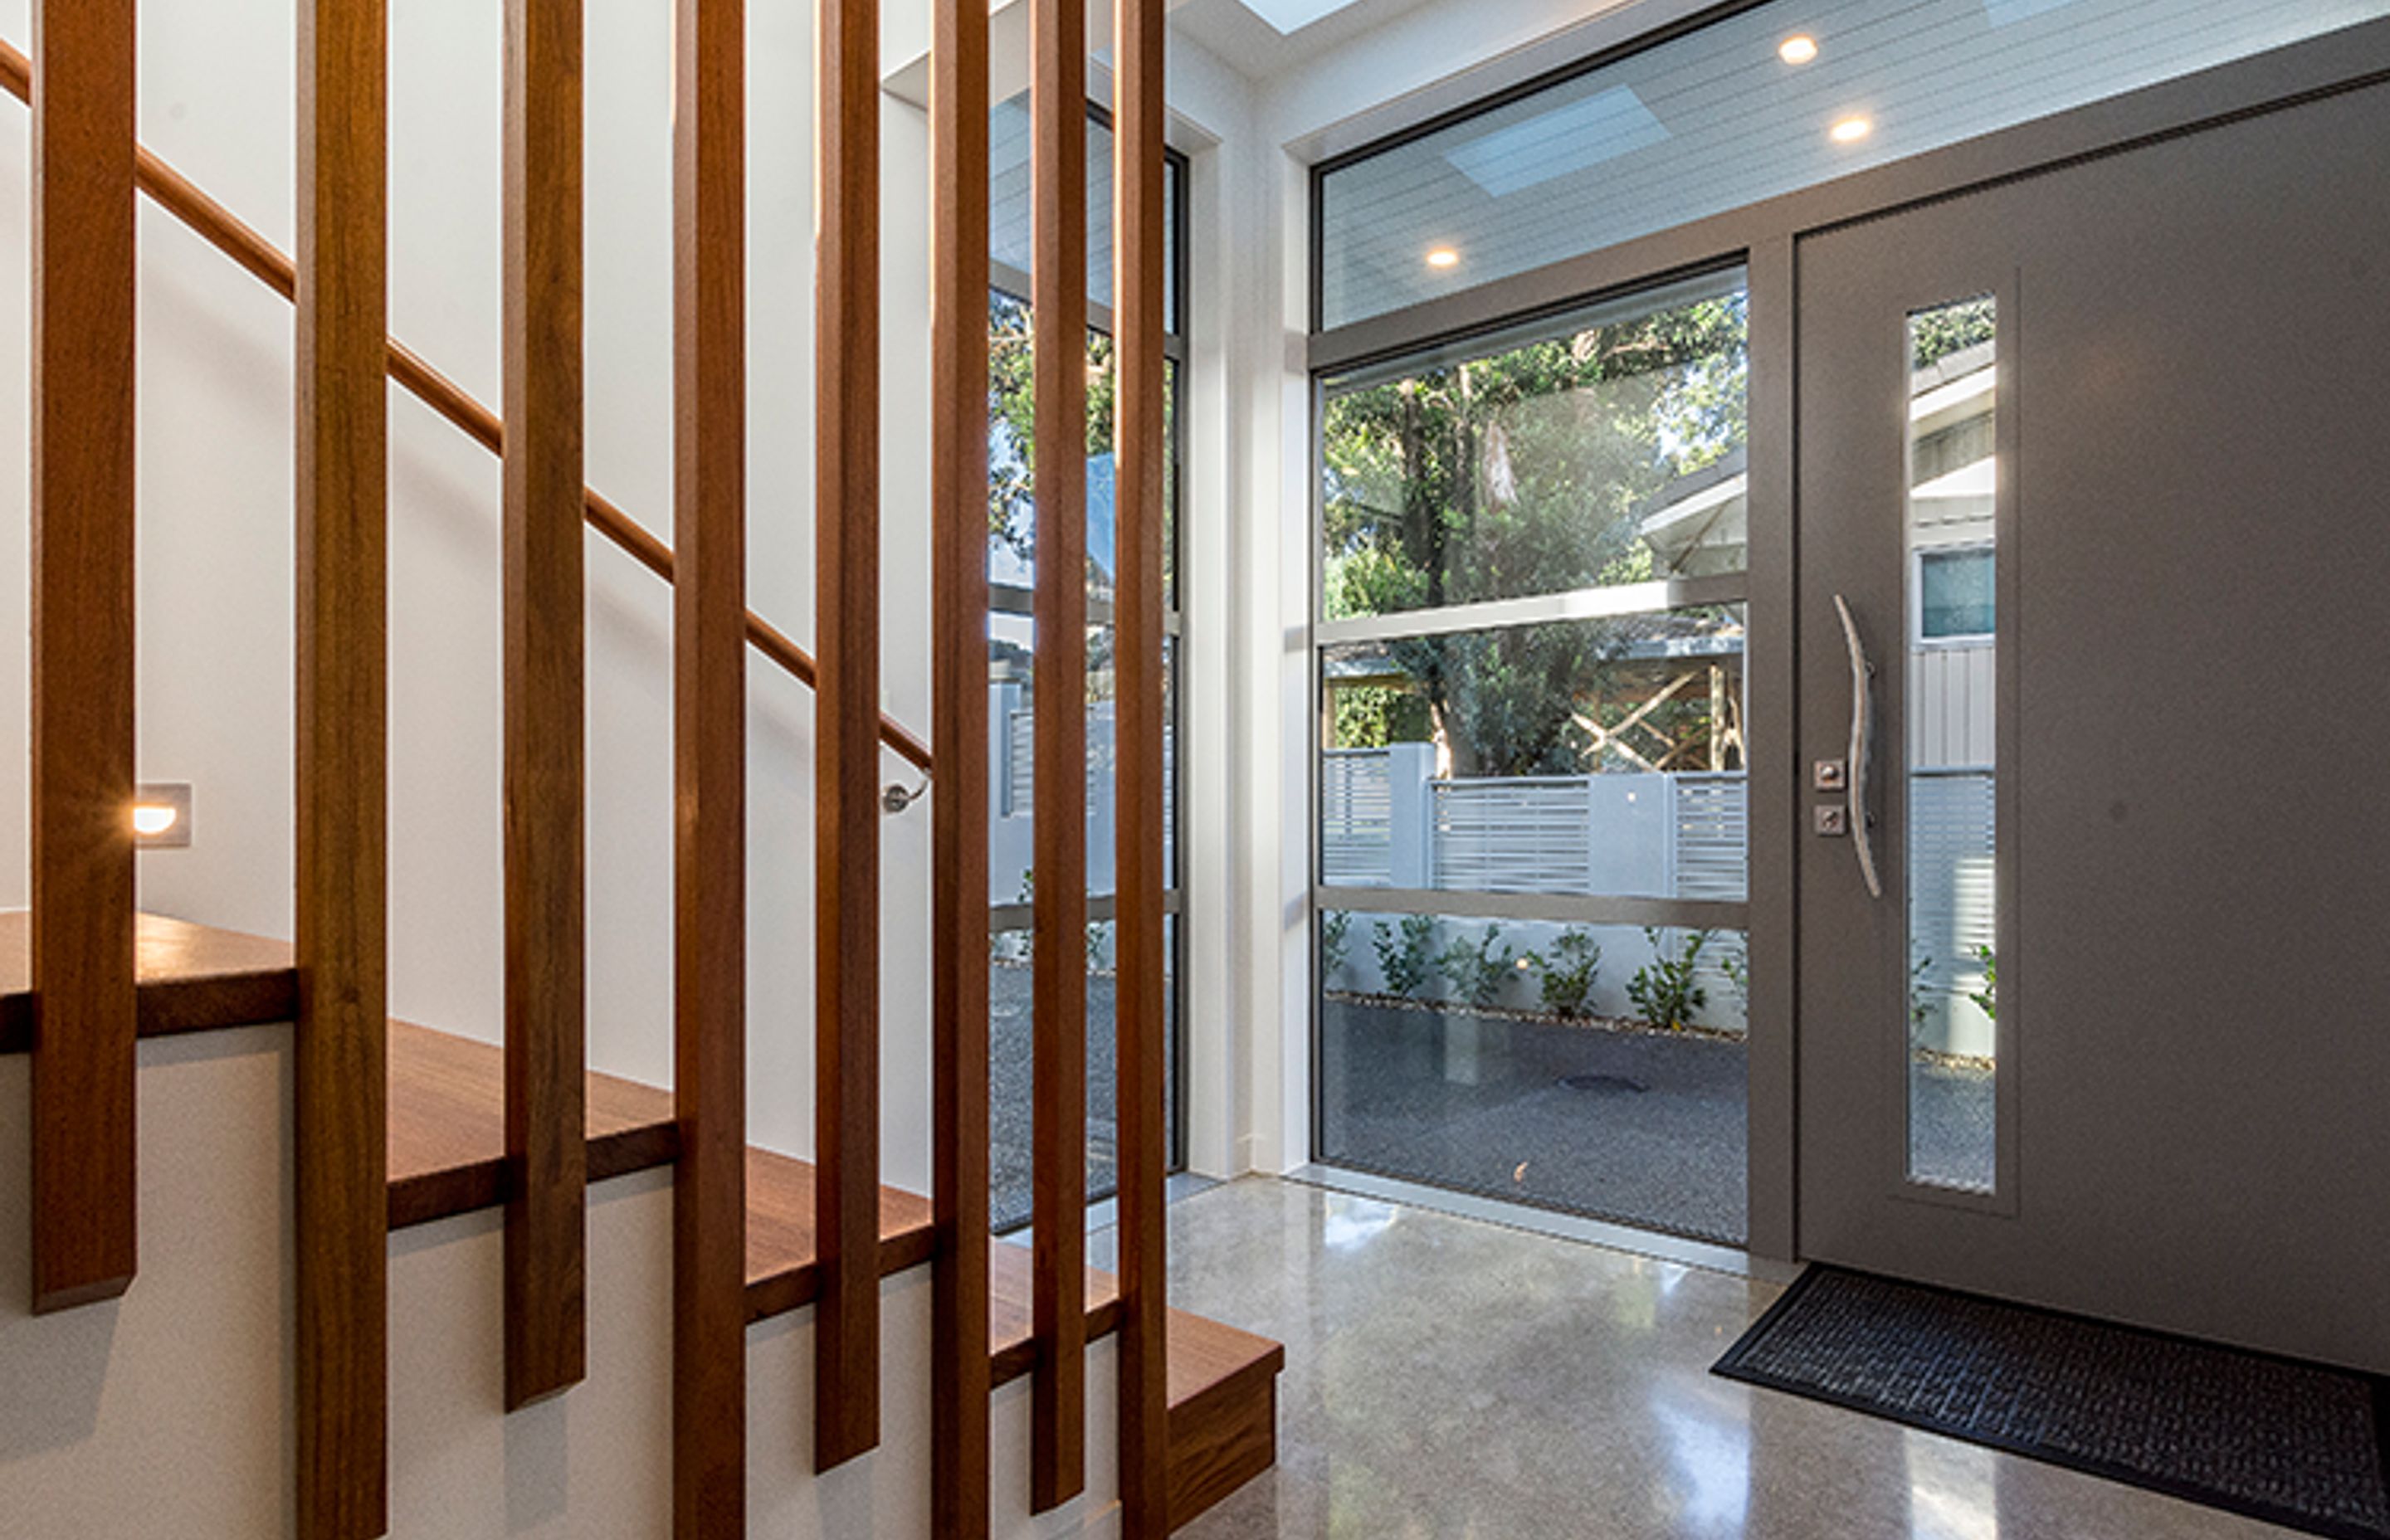 The entry features a hardwood staircase and cloakroom and polished concrete floors throughout. 